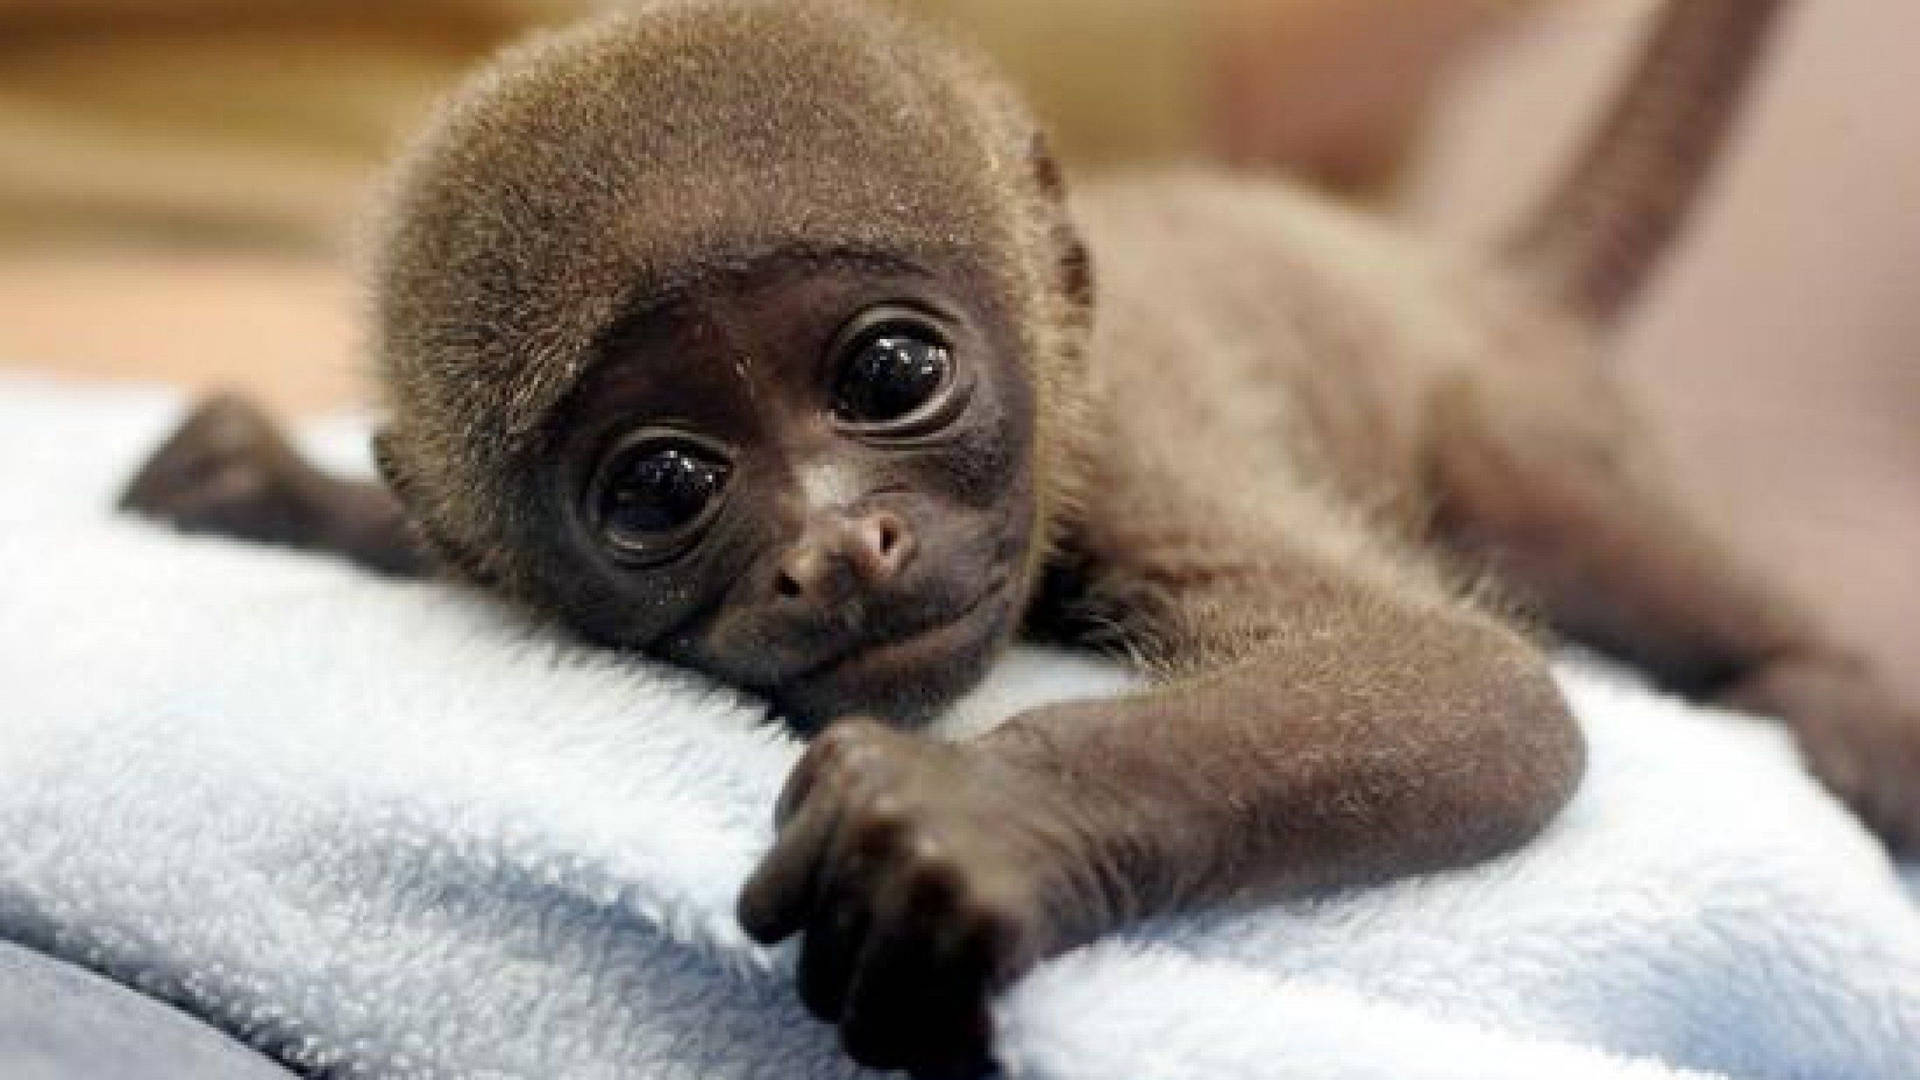 Cute Monkey Resting On A Towel Background